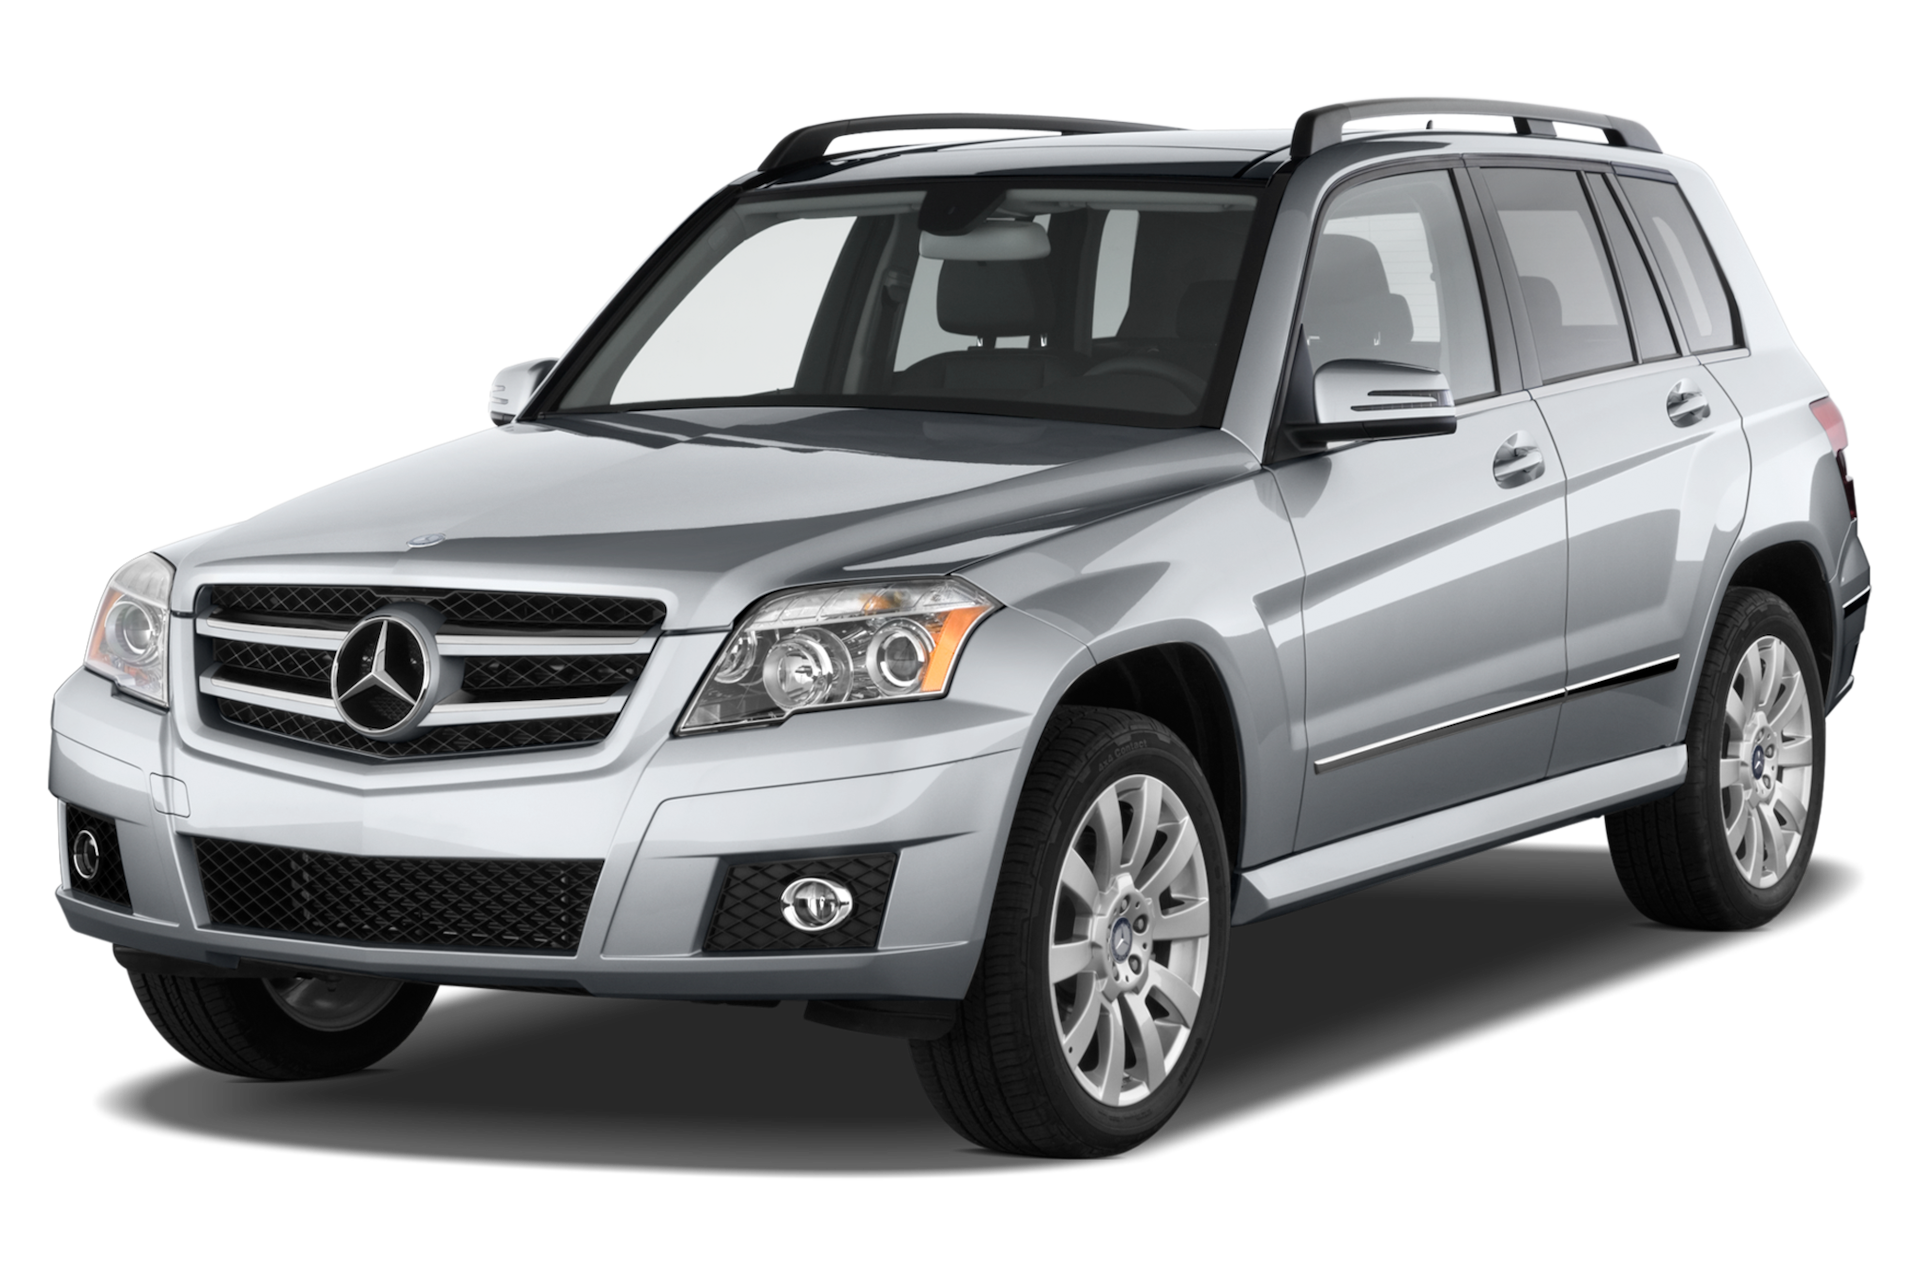 2011 Mercedes-Benz GLK-Class Prices, Reviews, and Photos - MotorTrend